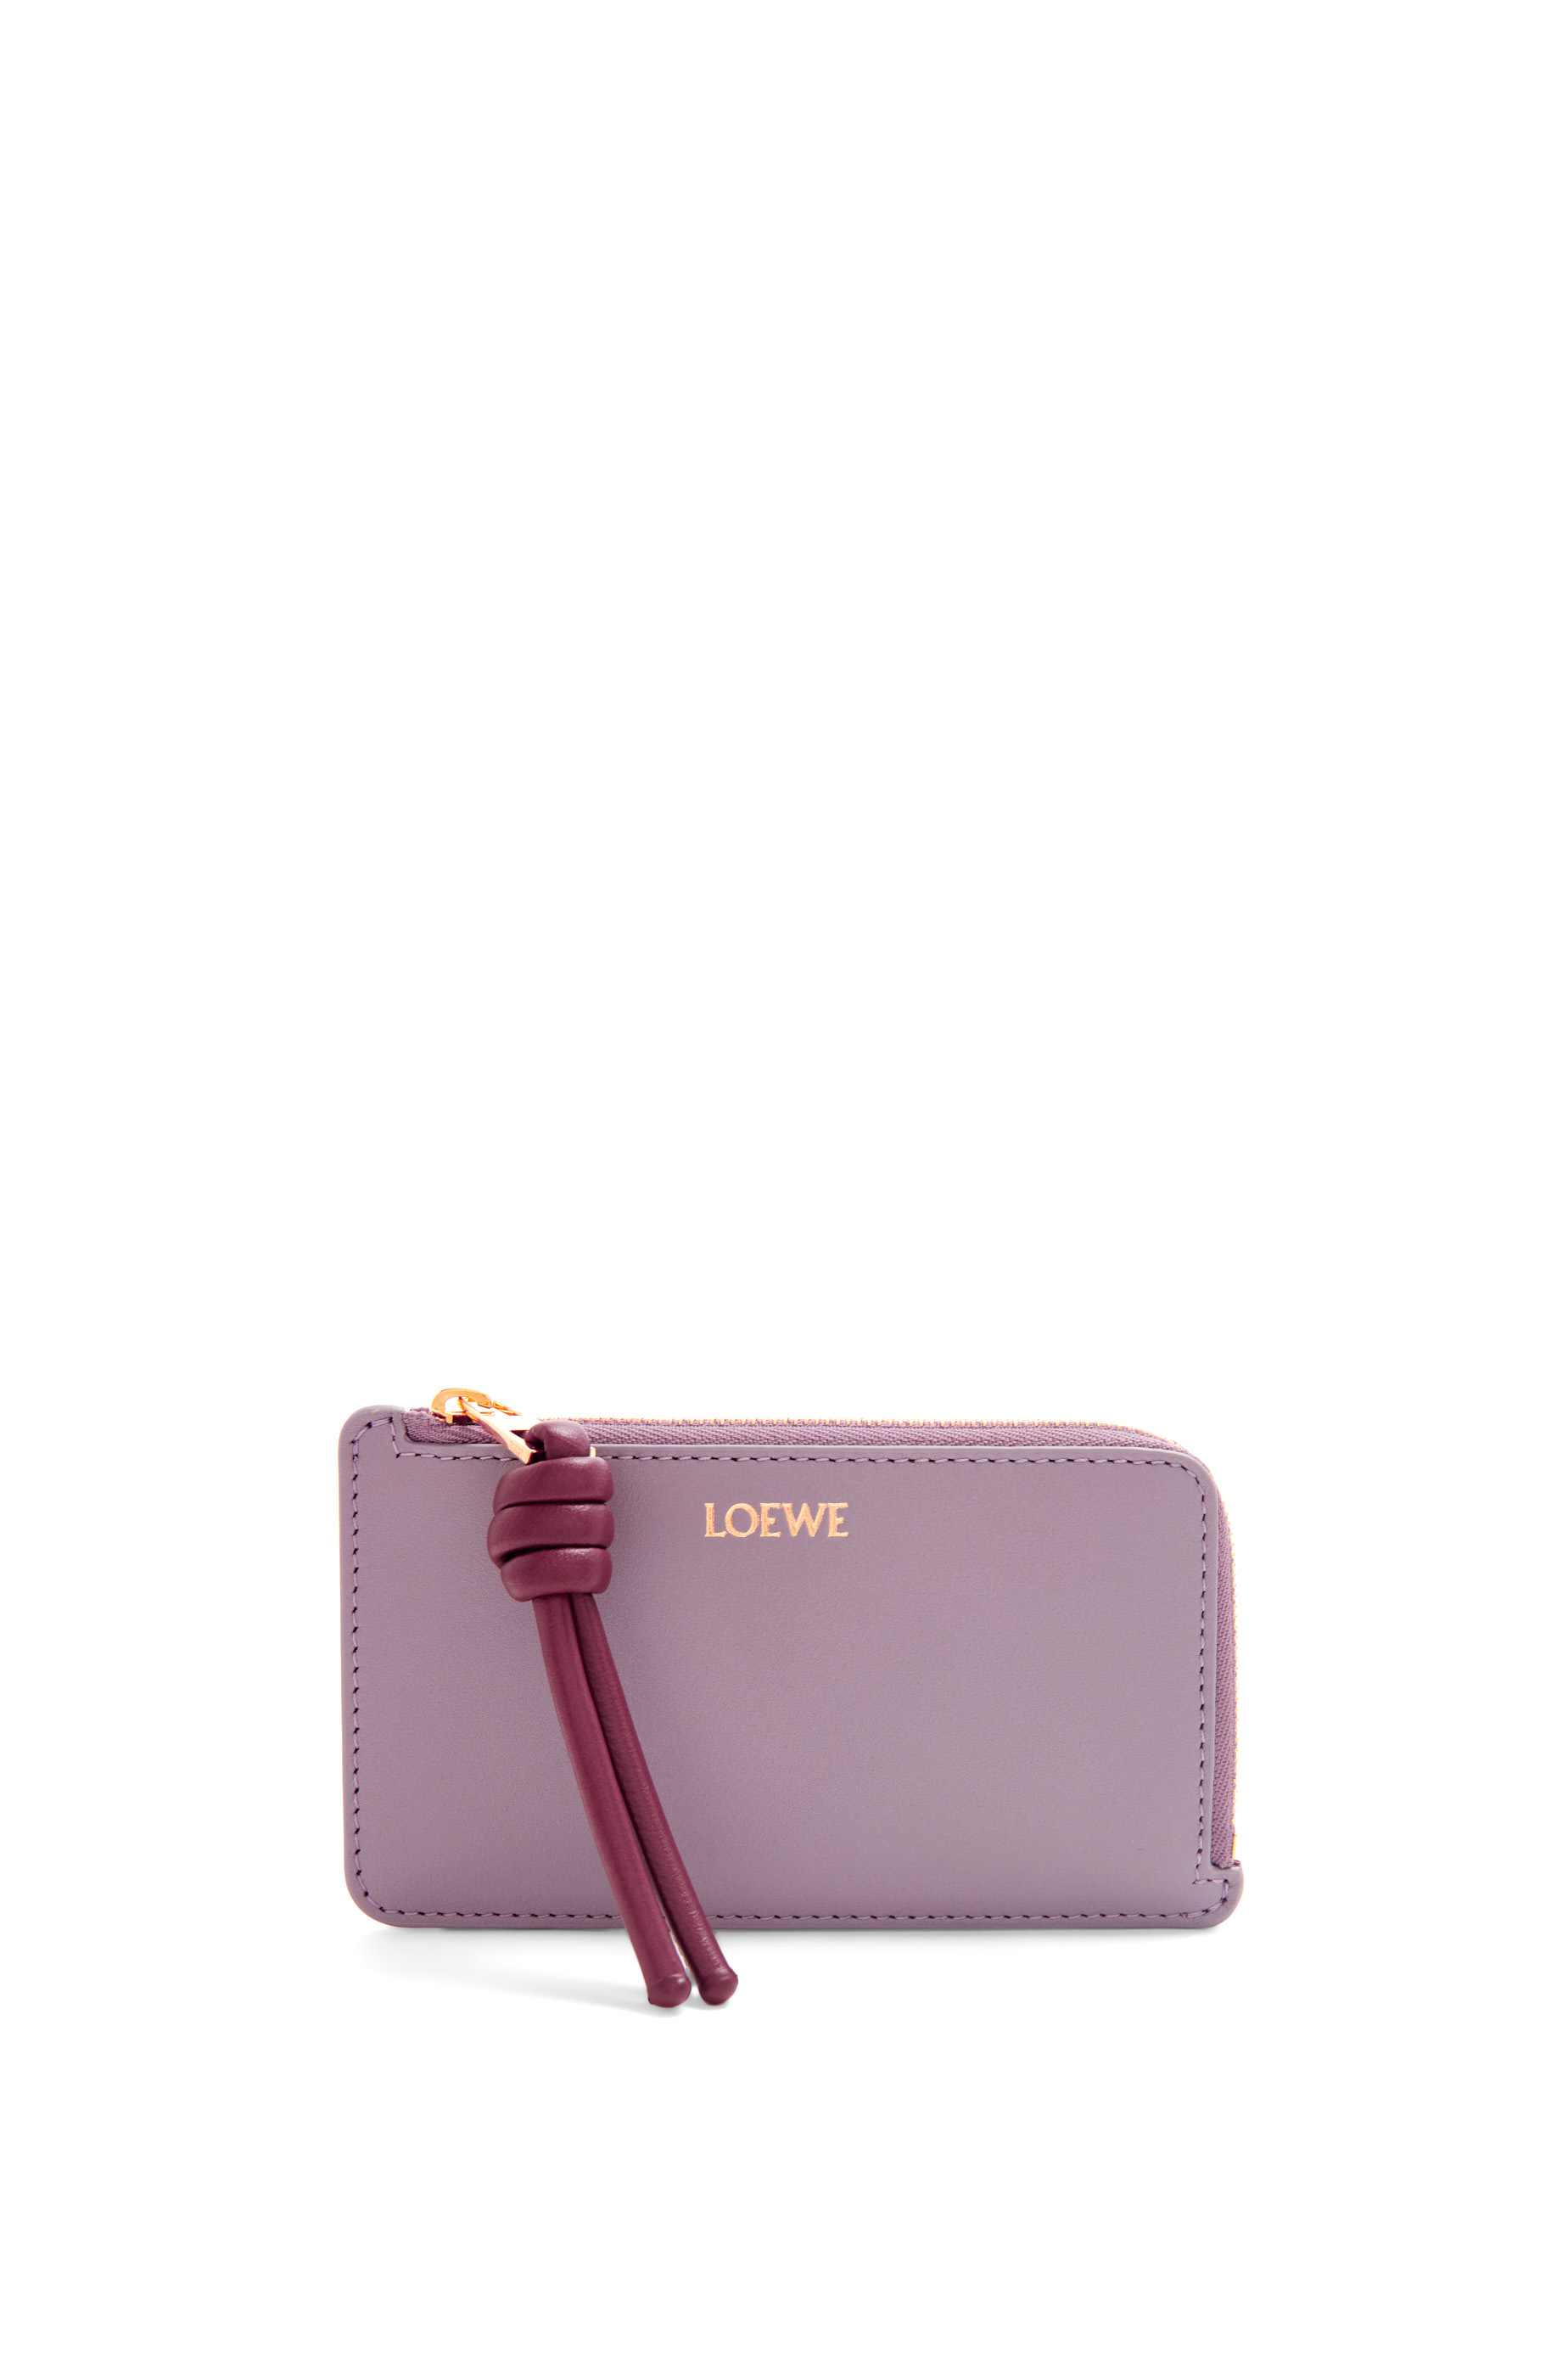 LOEWE Knot coin cardholder in shiny nappa calfskin Dirty Mauve 